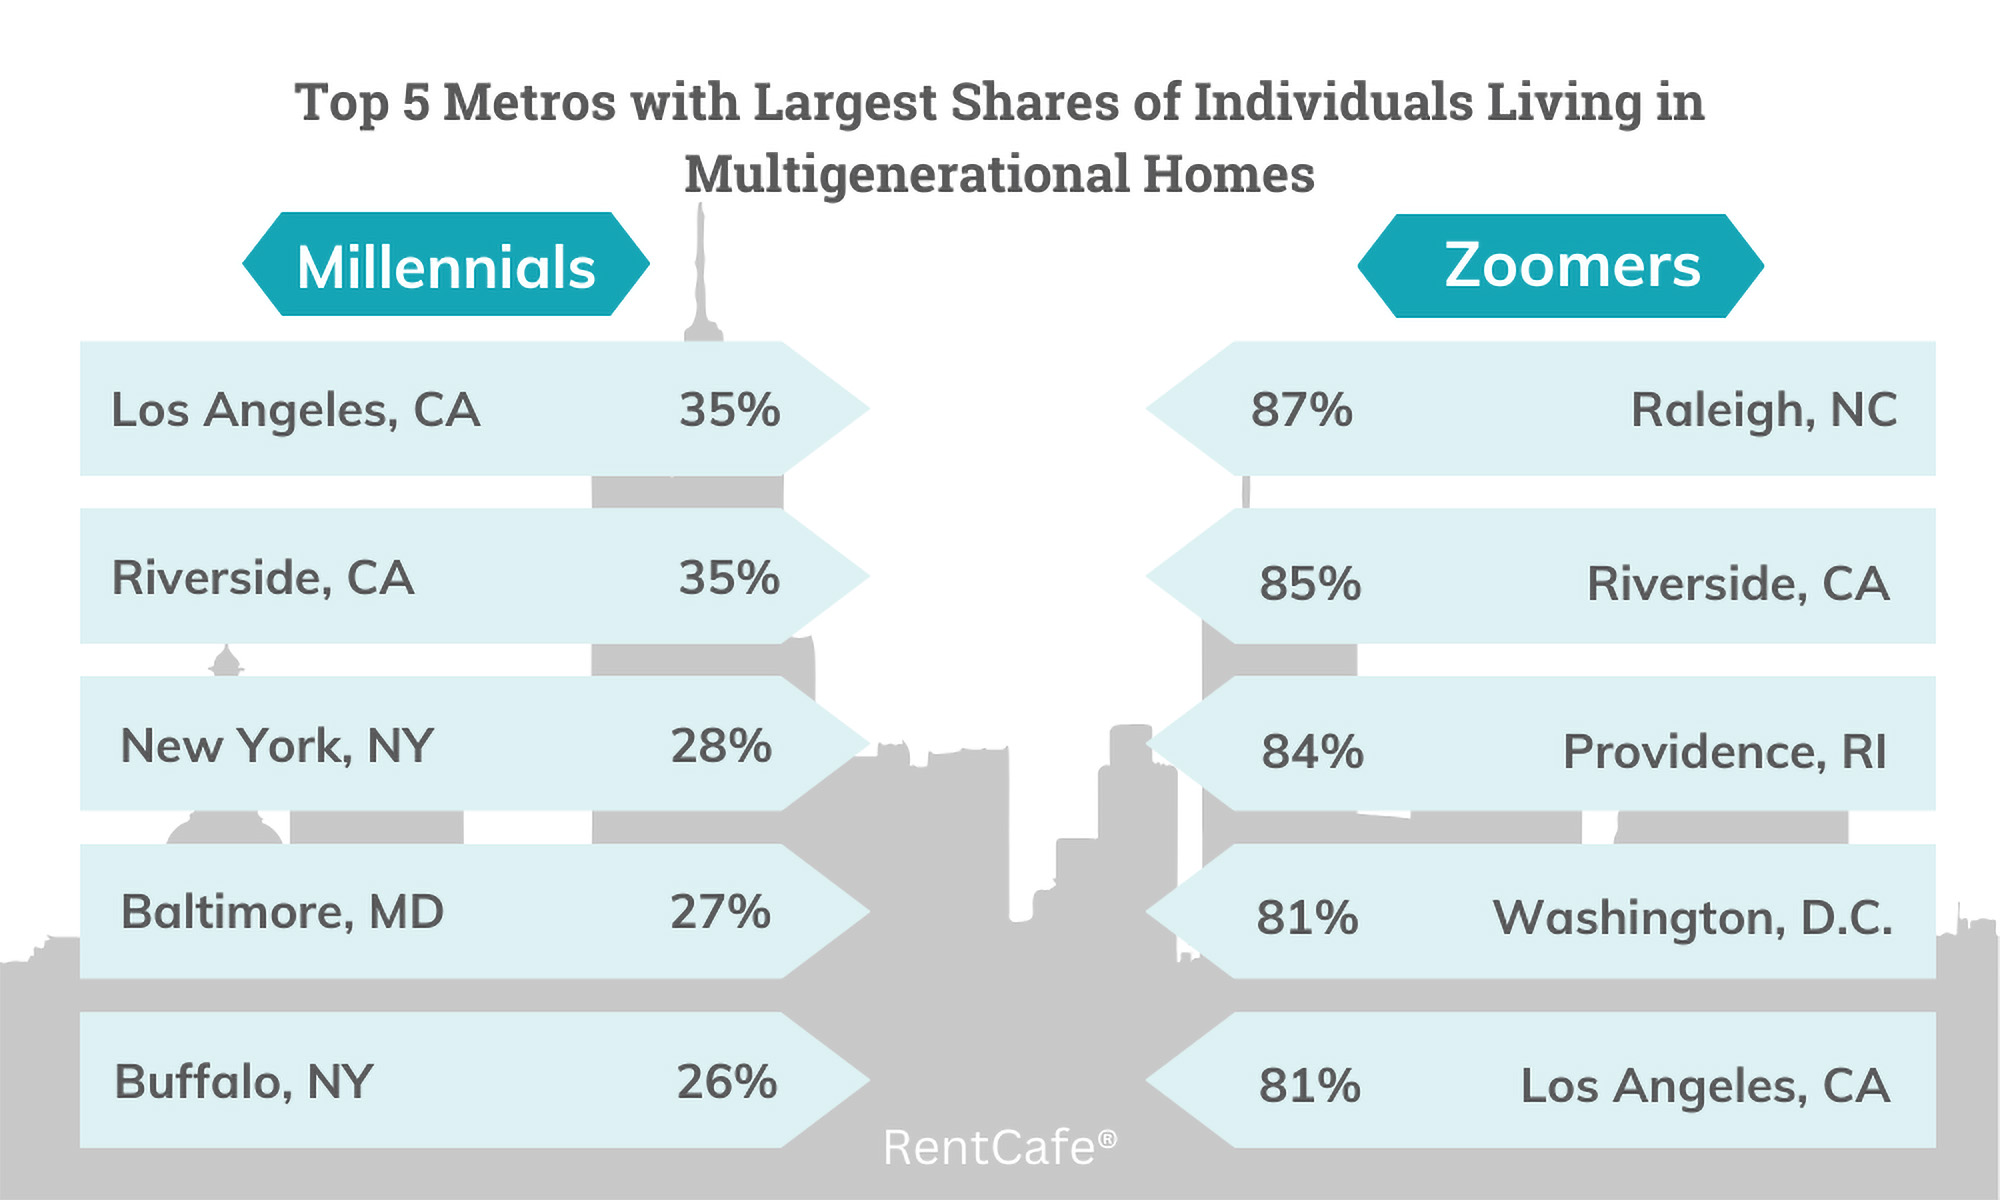 RentCafe Top 5 metros with the largest shares of individuals living in multigenerational homes